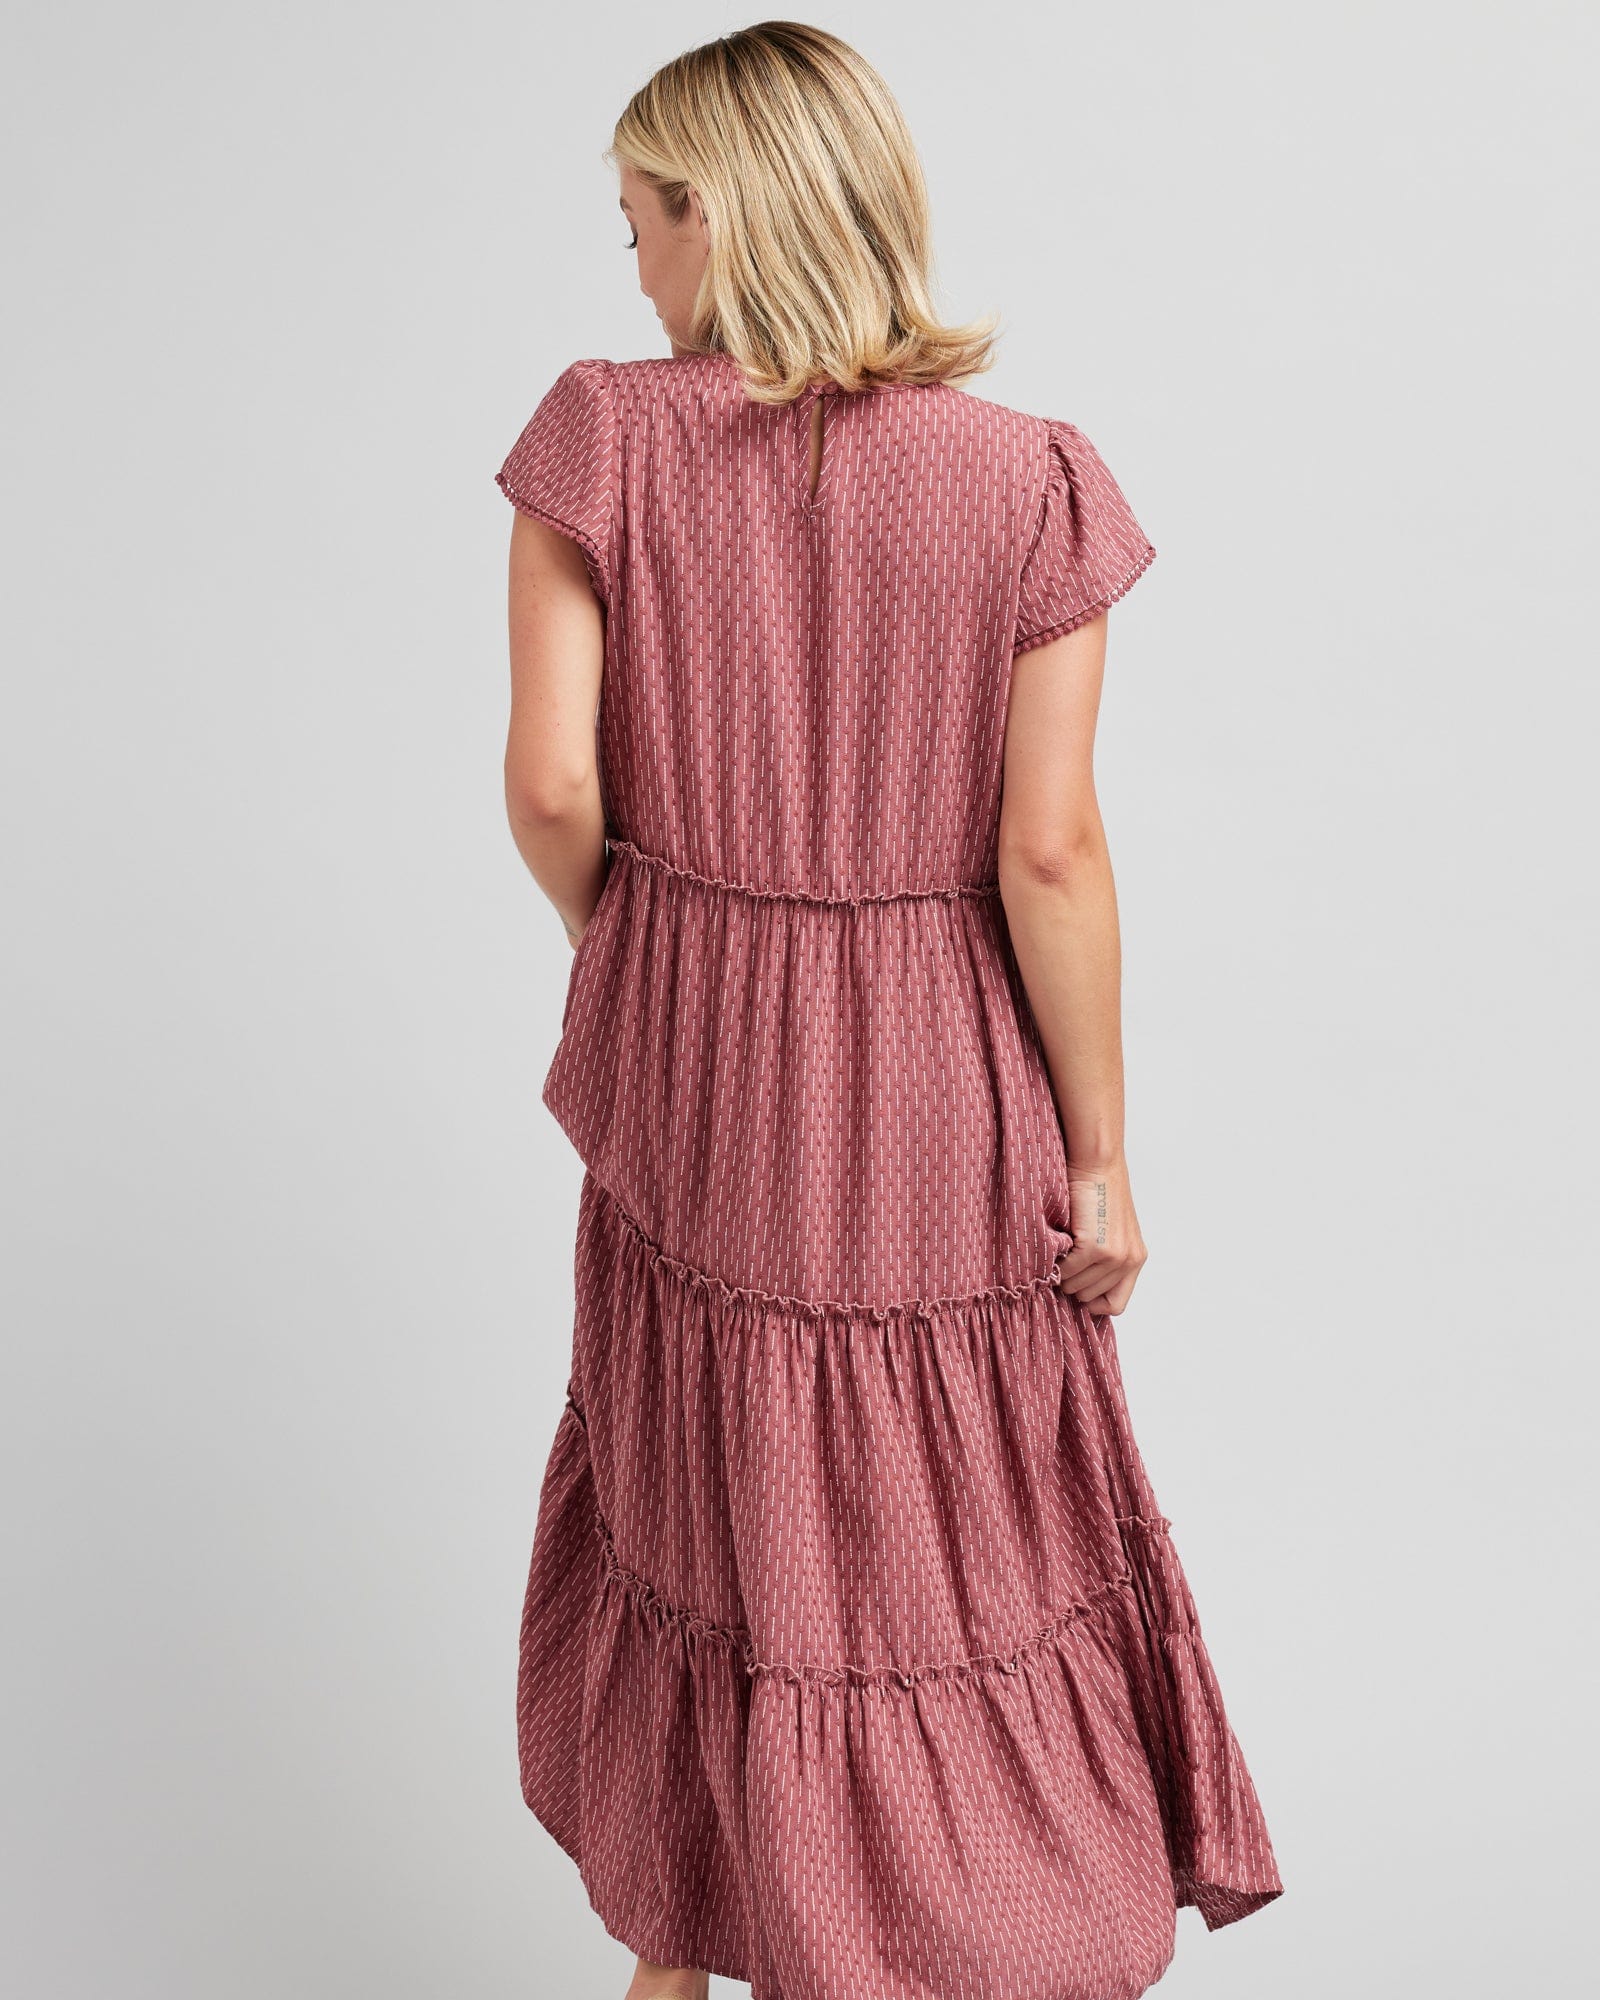 Woman in a short sleeve, midi-length, tiered skirt, pink dress